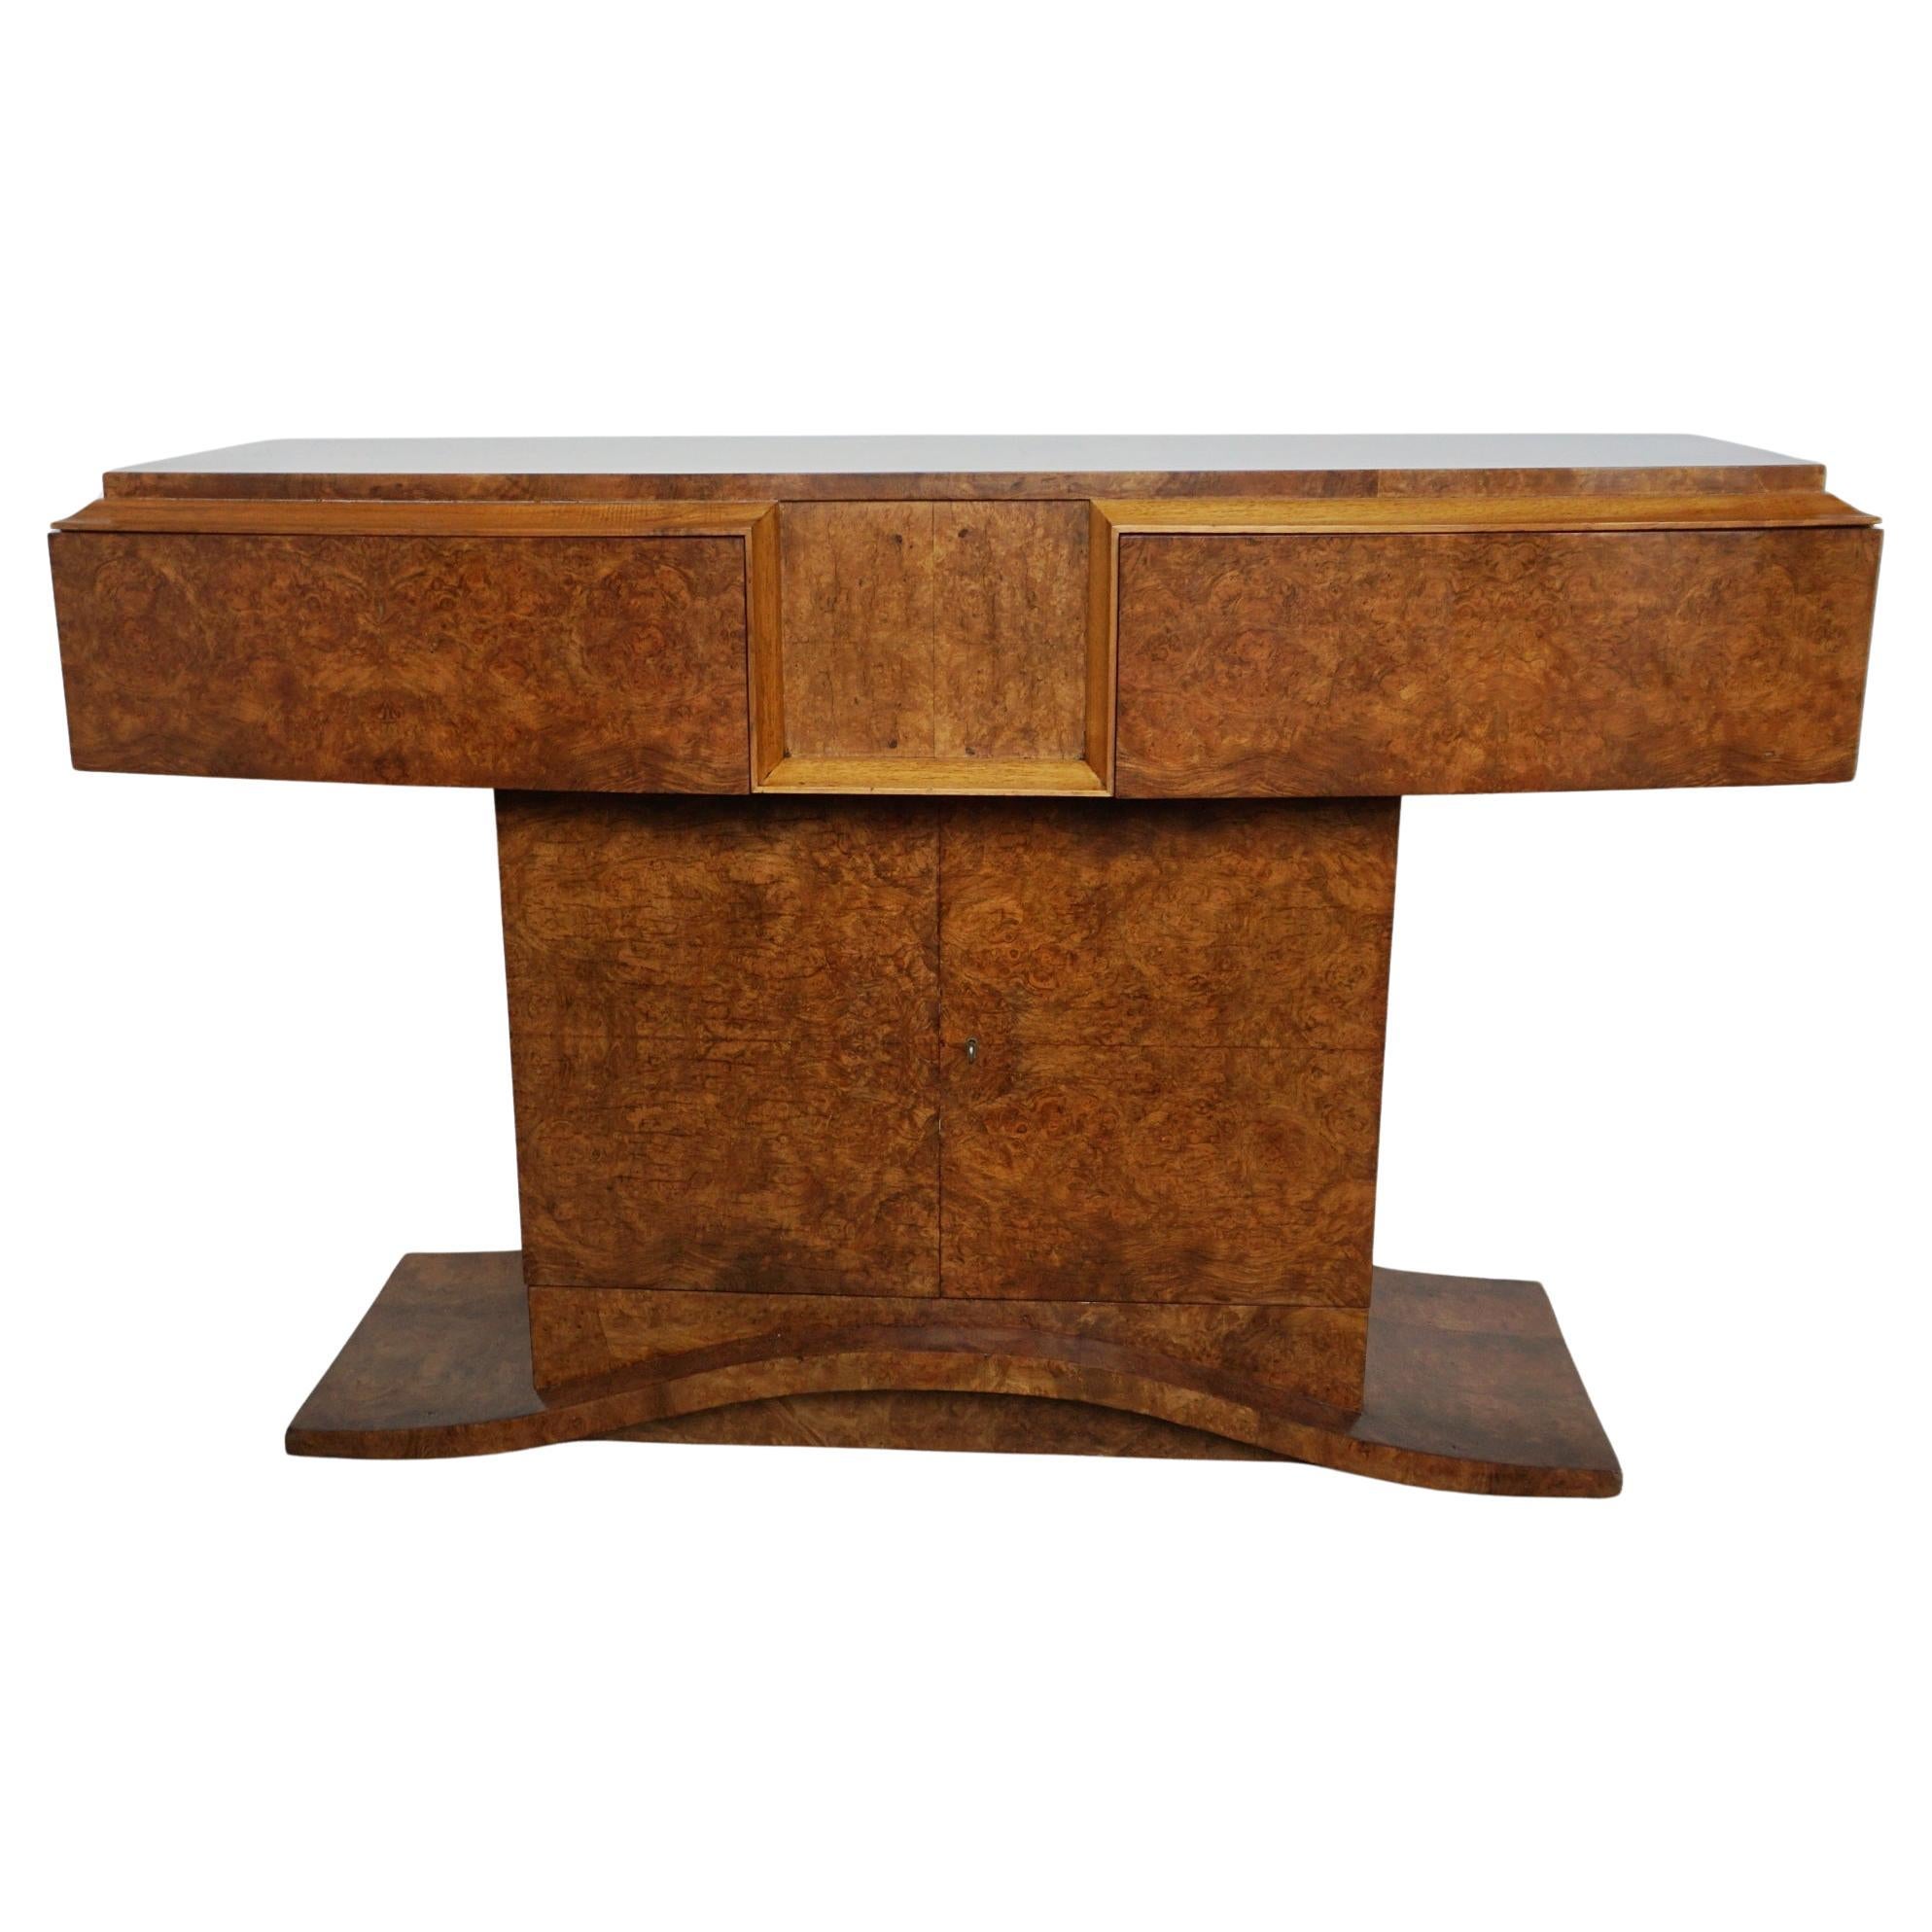 An Art Deco Console Table by Hille. Burr walnut veneered with figured walnut banding. Central opening cabinet with two pull out draws above set over a curved base. Glass protective top not photographed.

Dimensions: H 85cm W 135cm D 43cm

Origin: